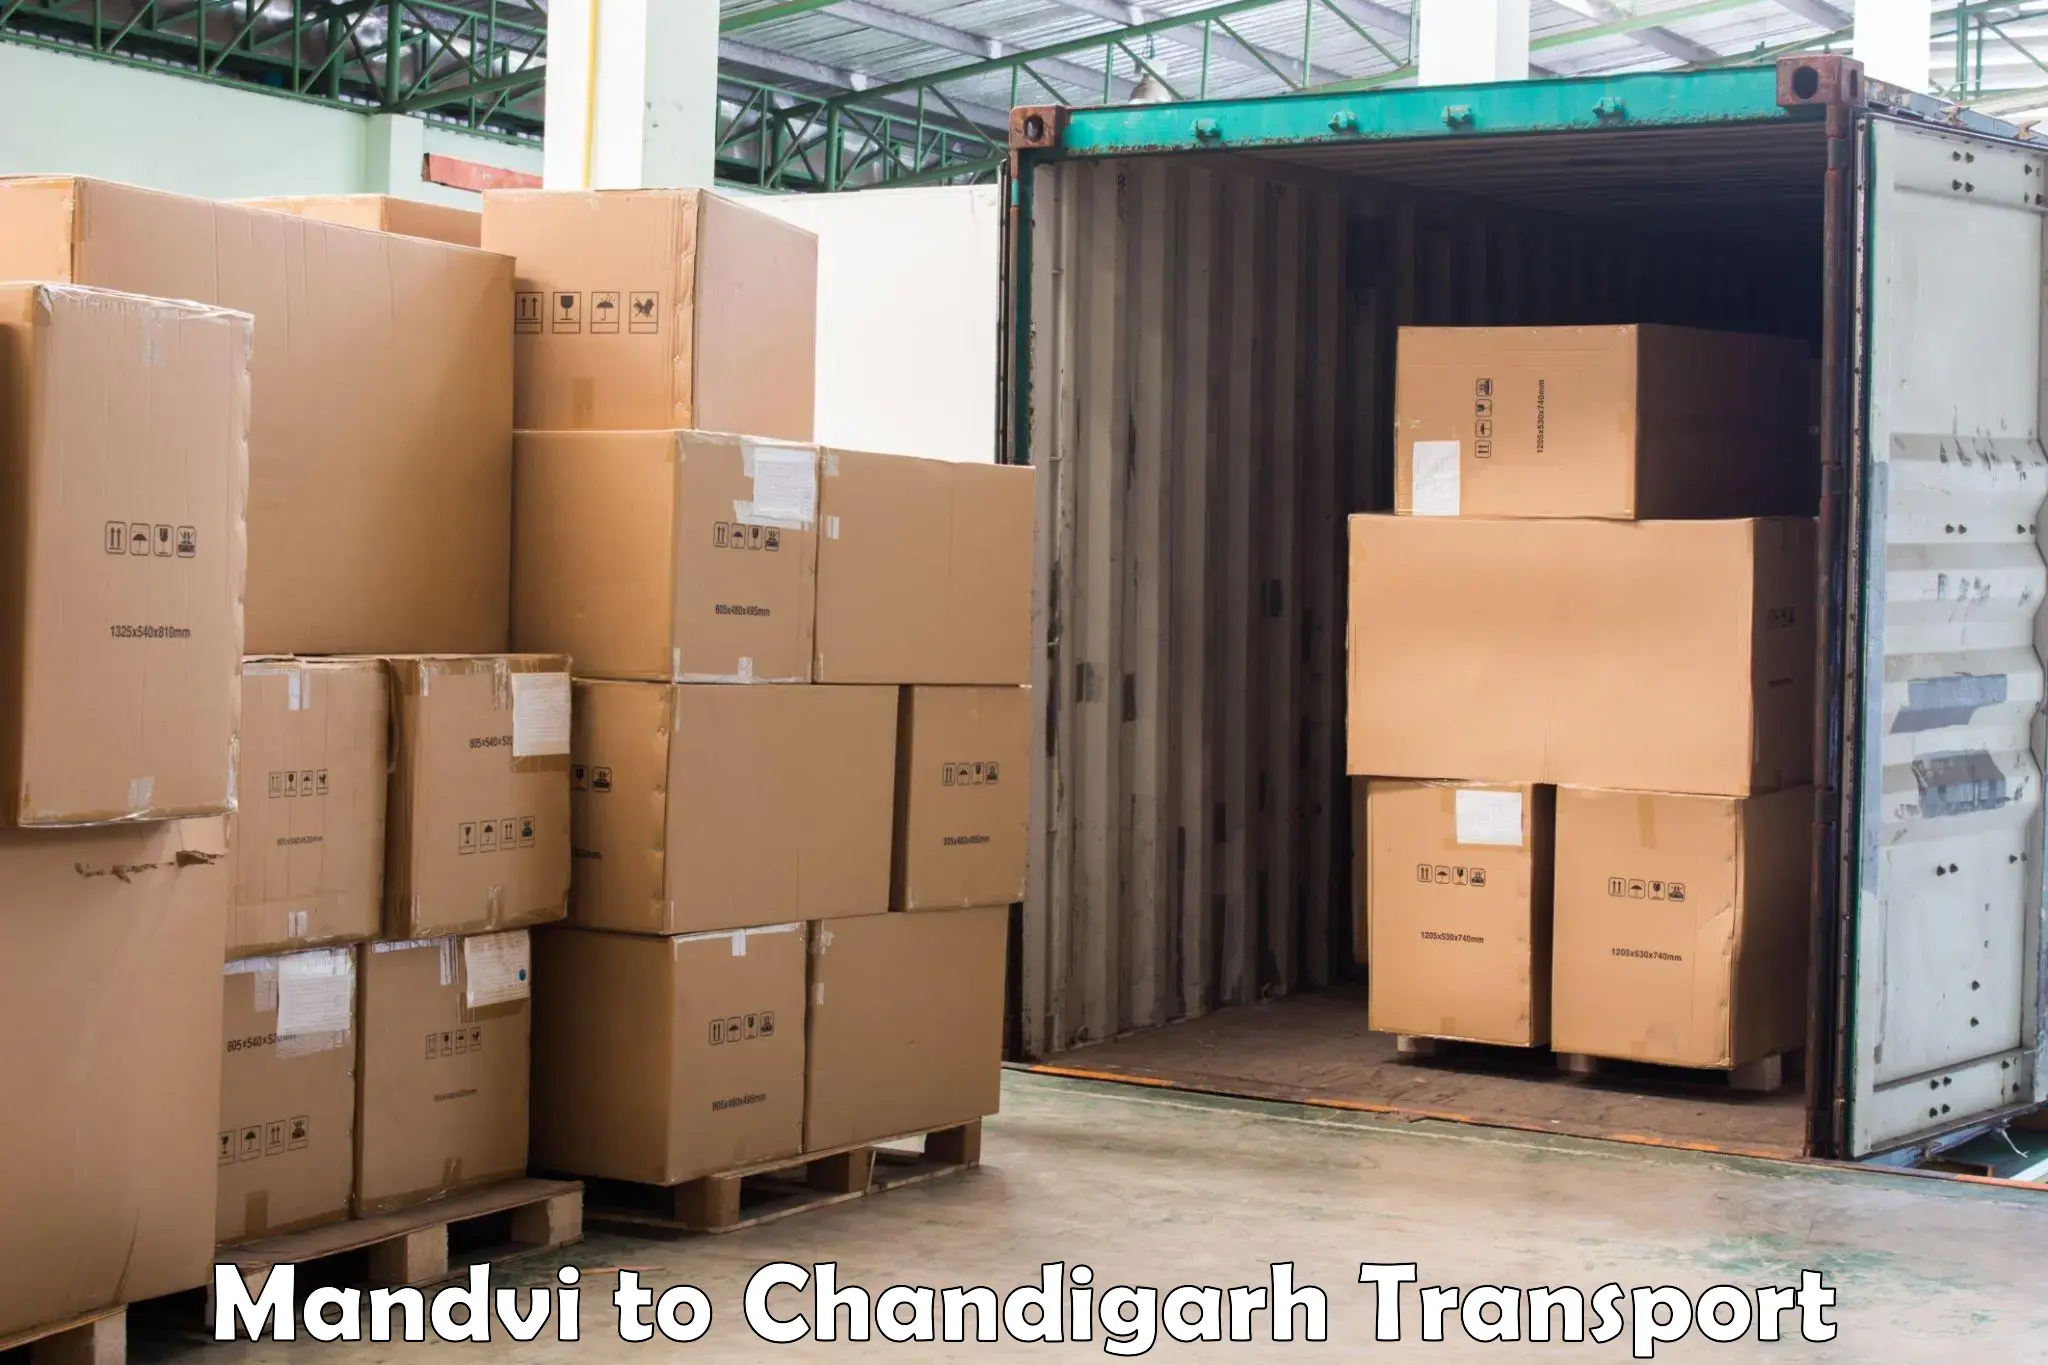 Transport bike from one state to another Mandvi to Chandigarh